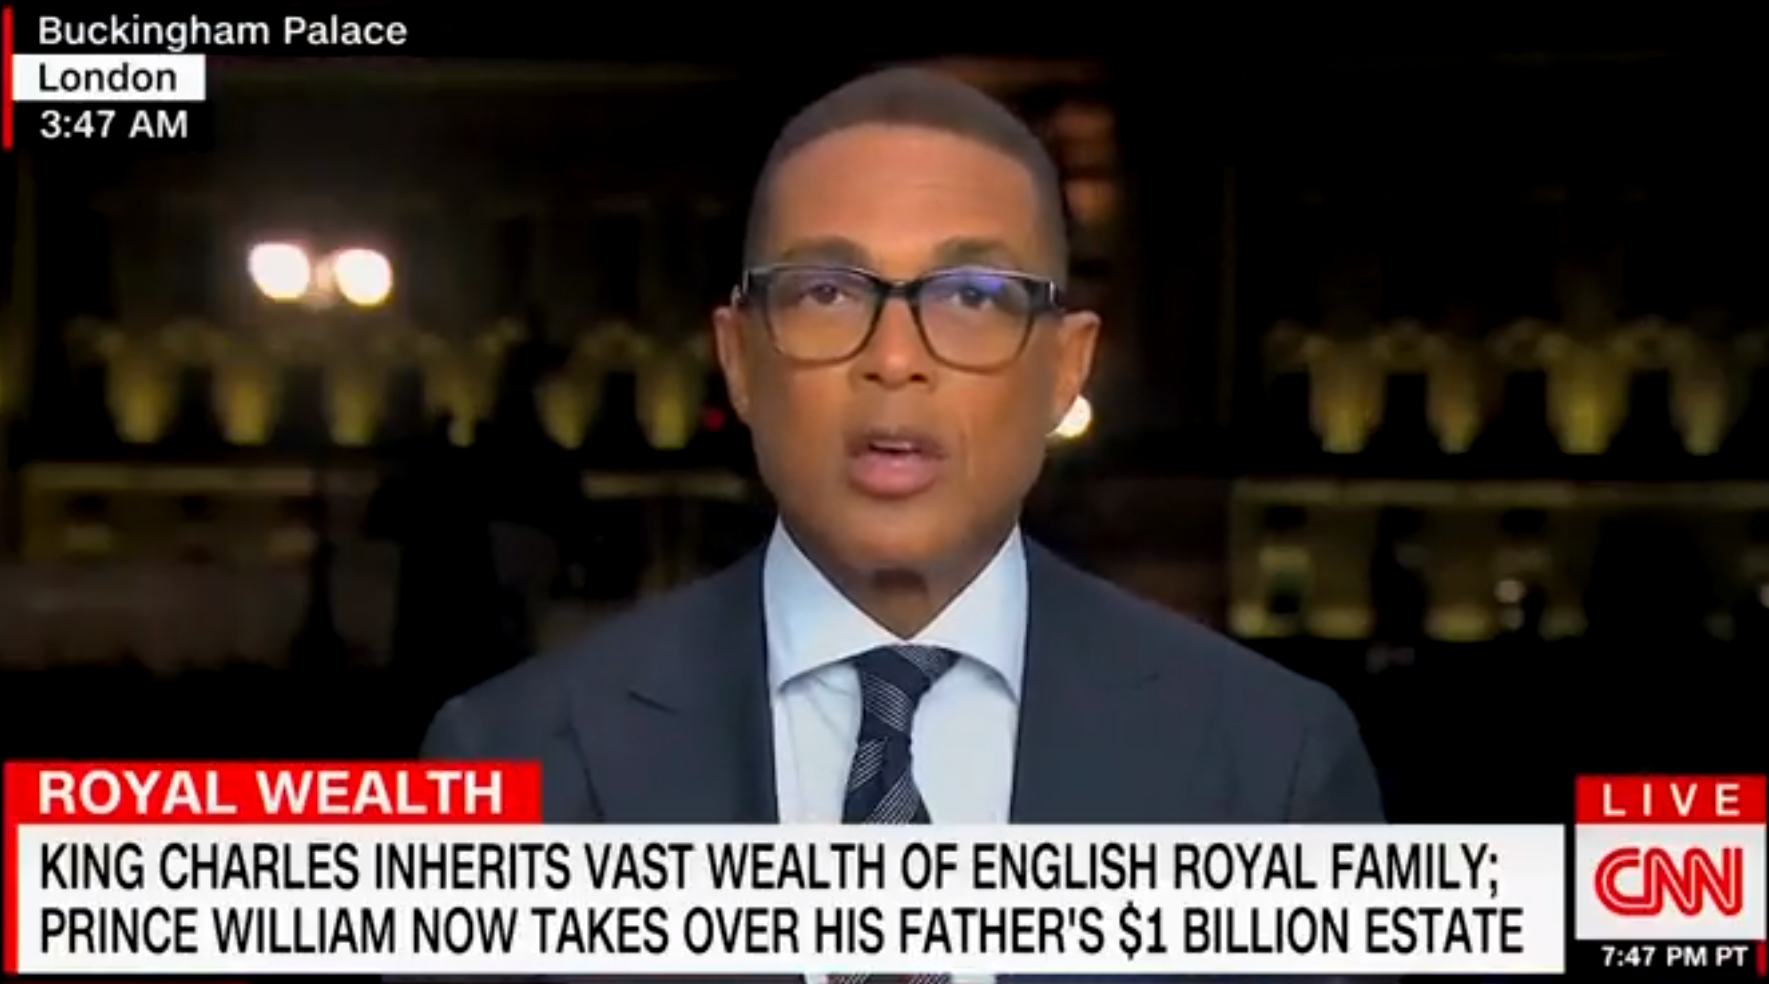 Don Lemon left Gobsmacked! In the vernacular of the Brits, this is simply brilliant.